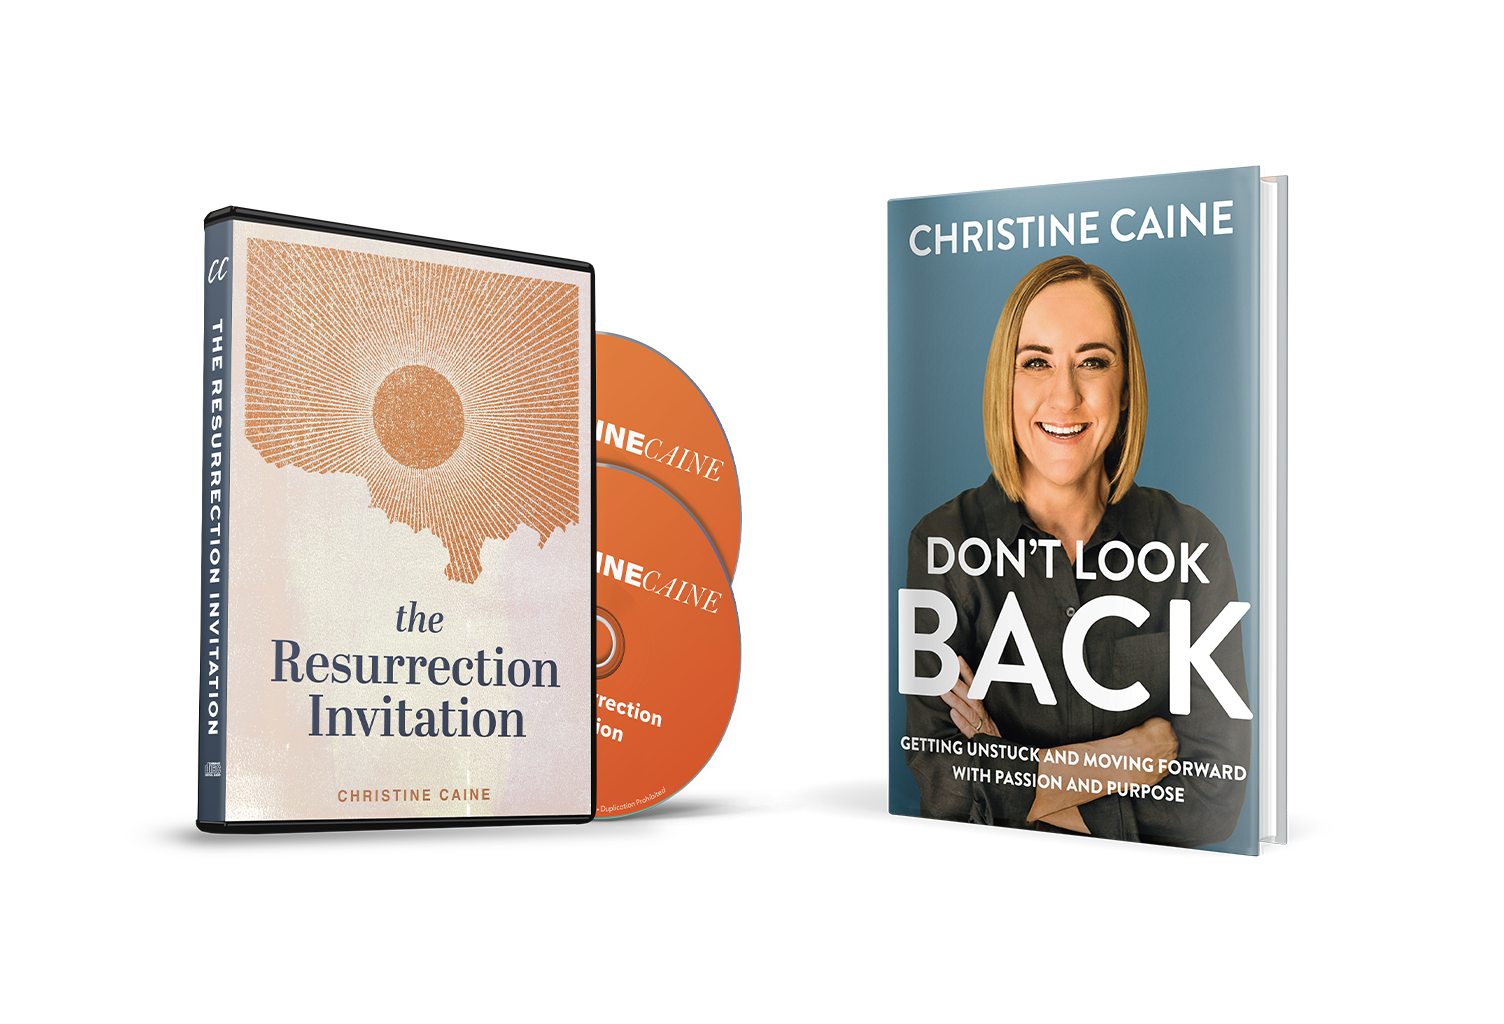 The Resurrection Invitation + Don't Look Back by Christine Caine from TBN